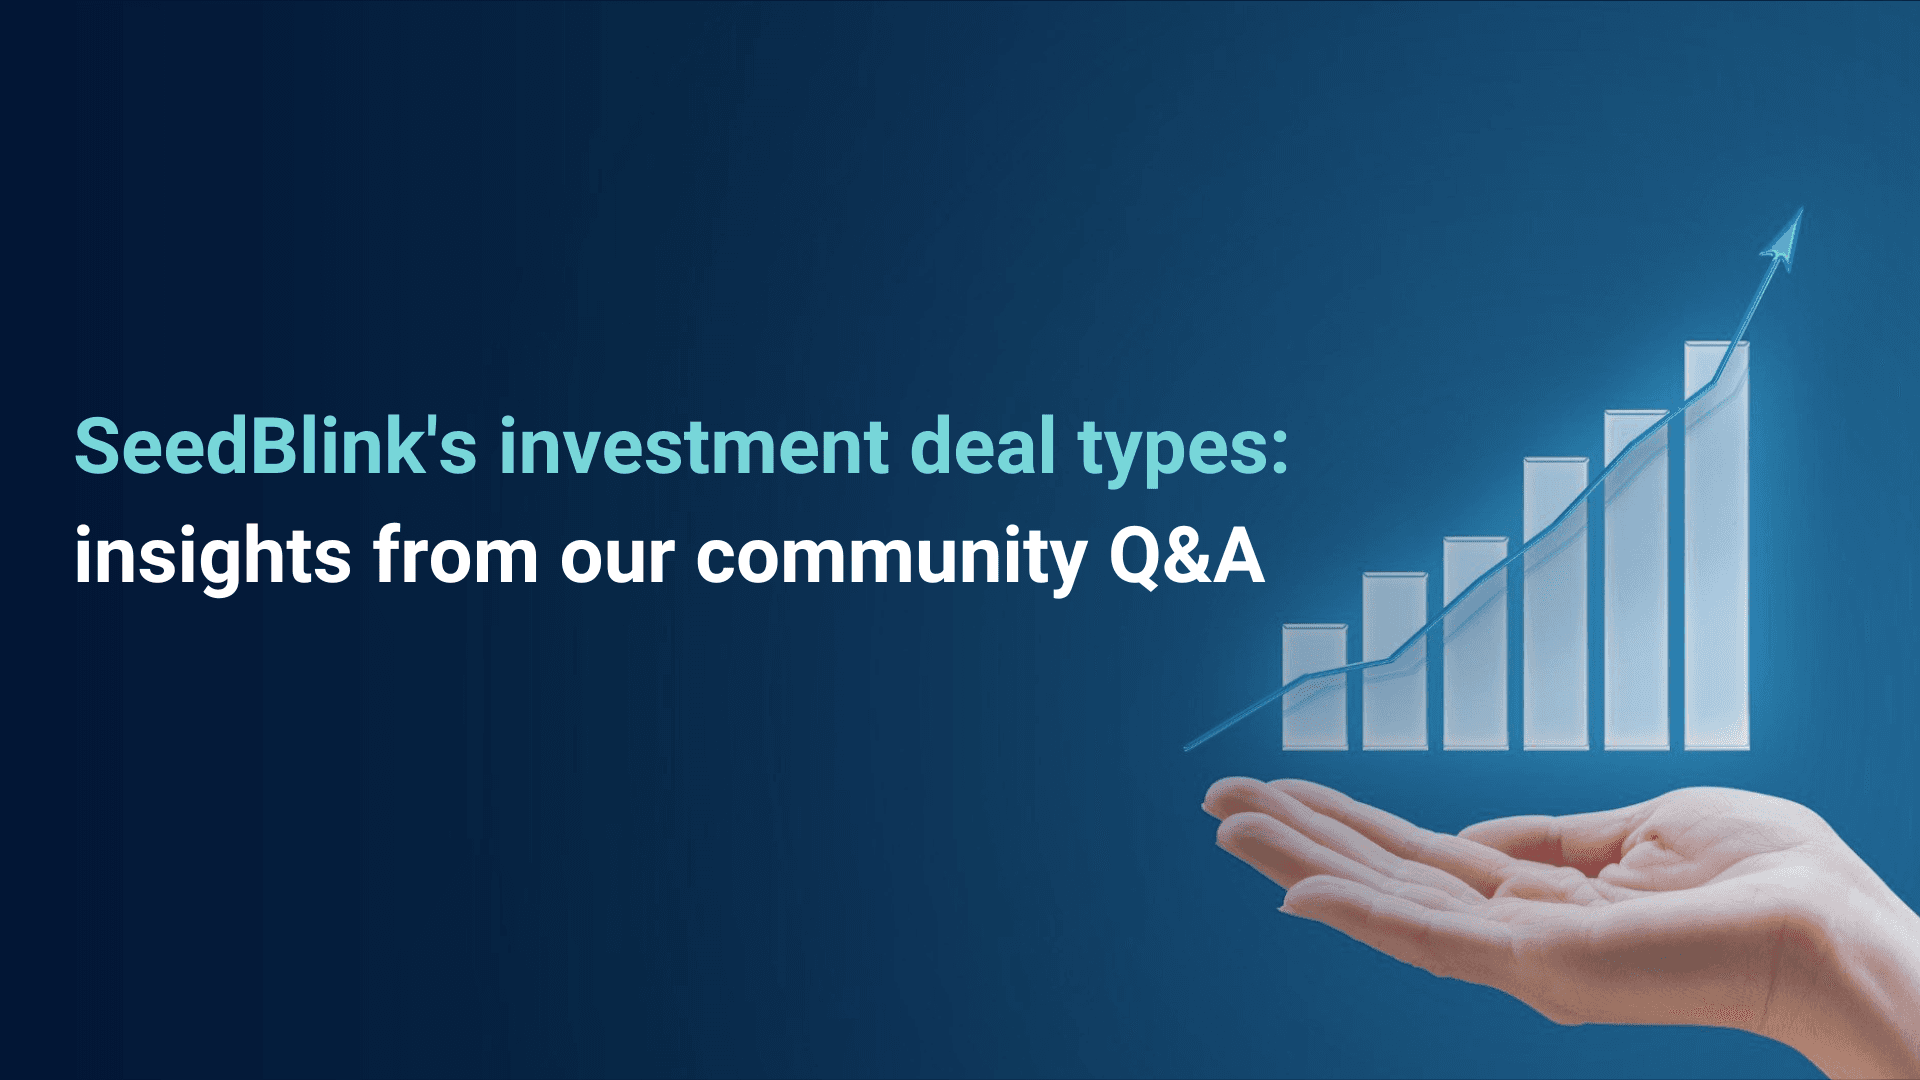 SeedBlink's investment deal types: insights from our community Q&A